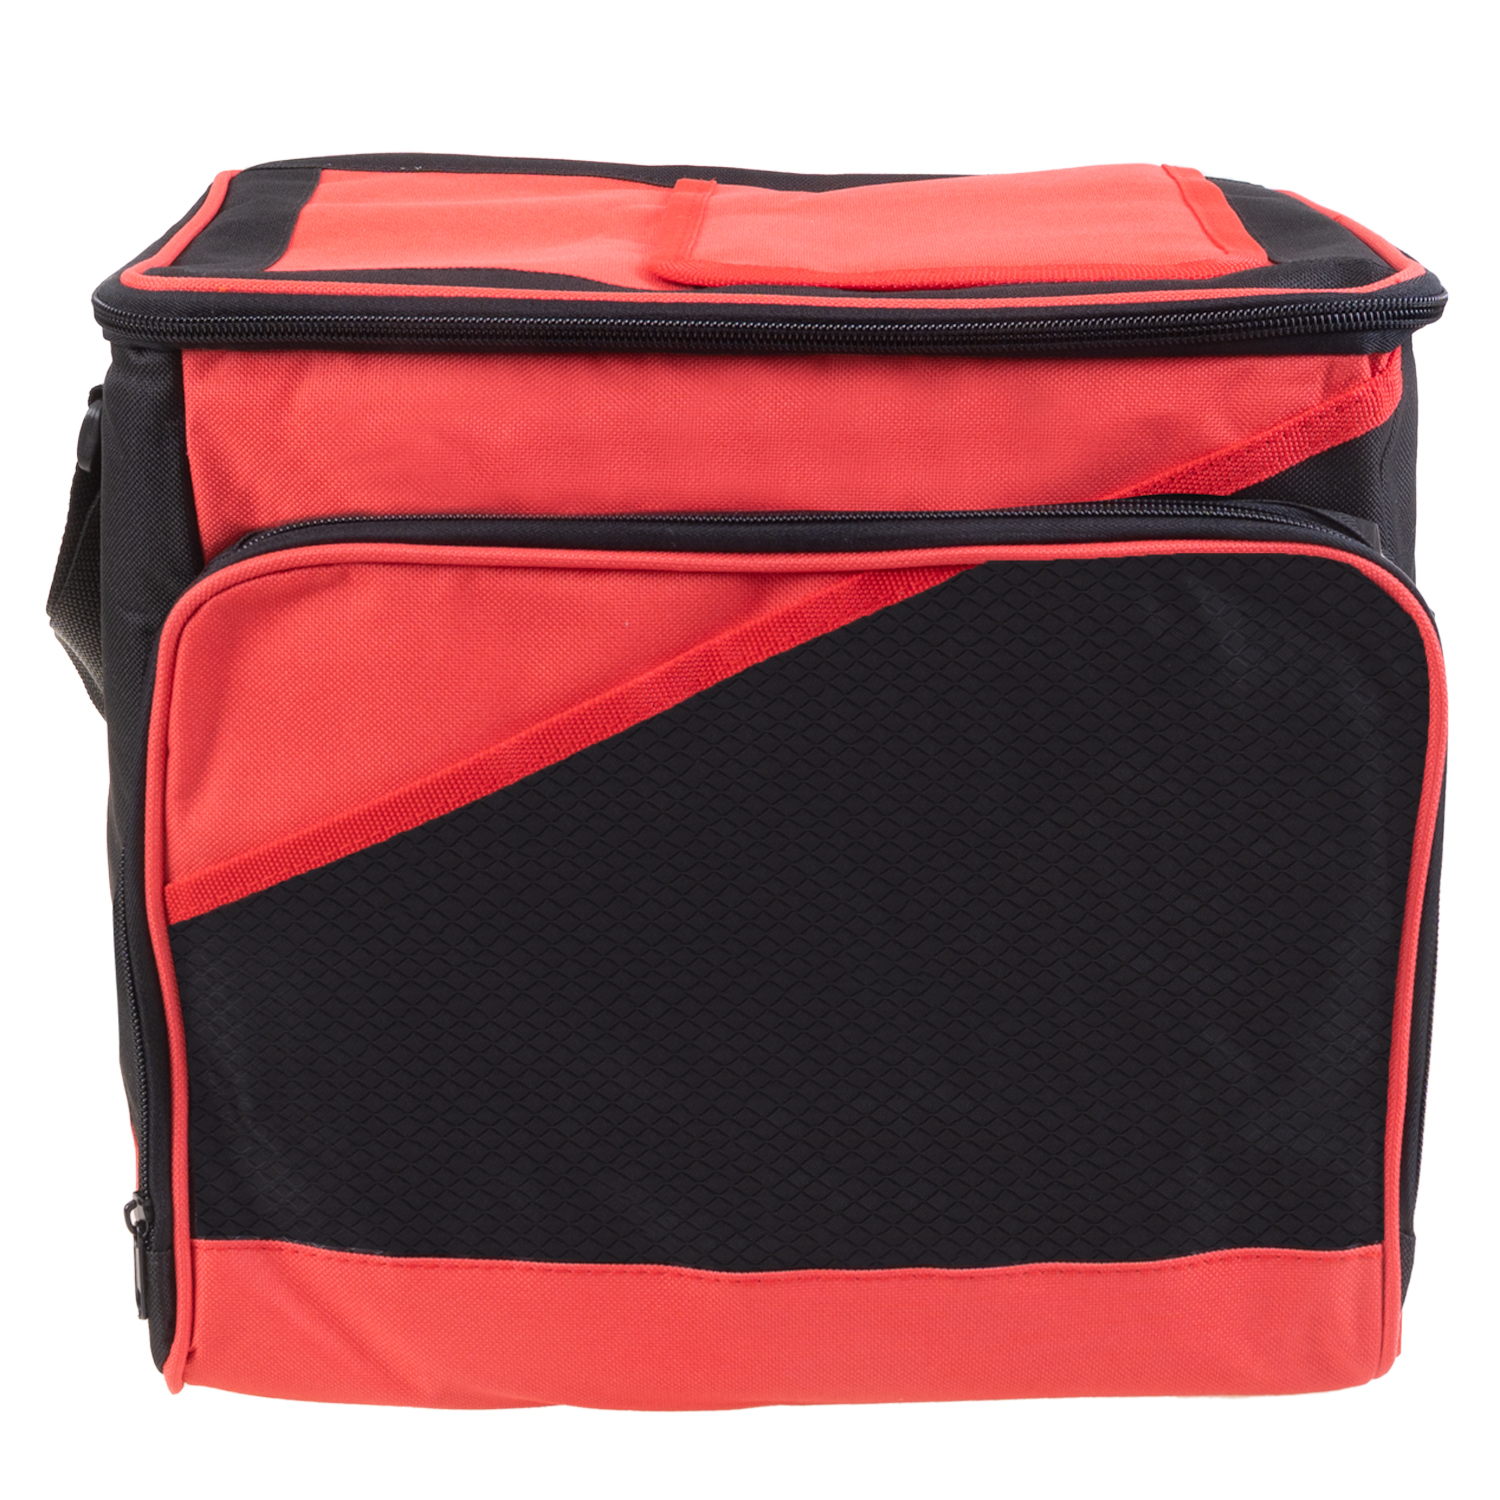 Large insulated cooler bag, 24 can capacity - Red